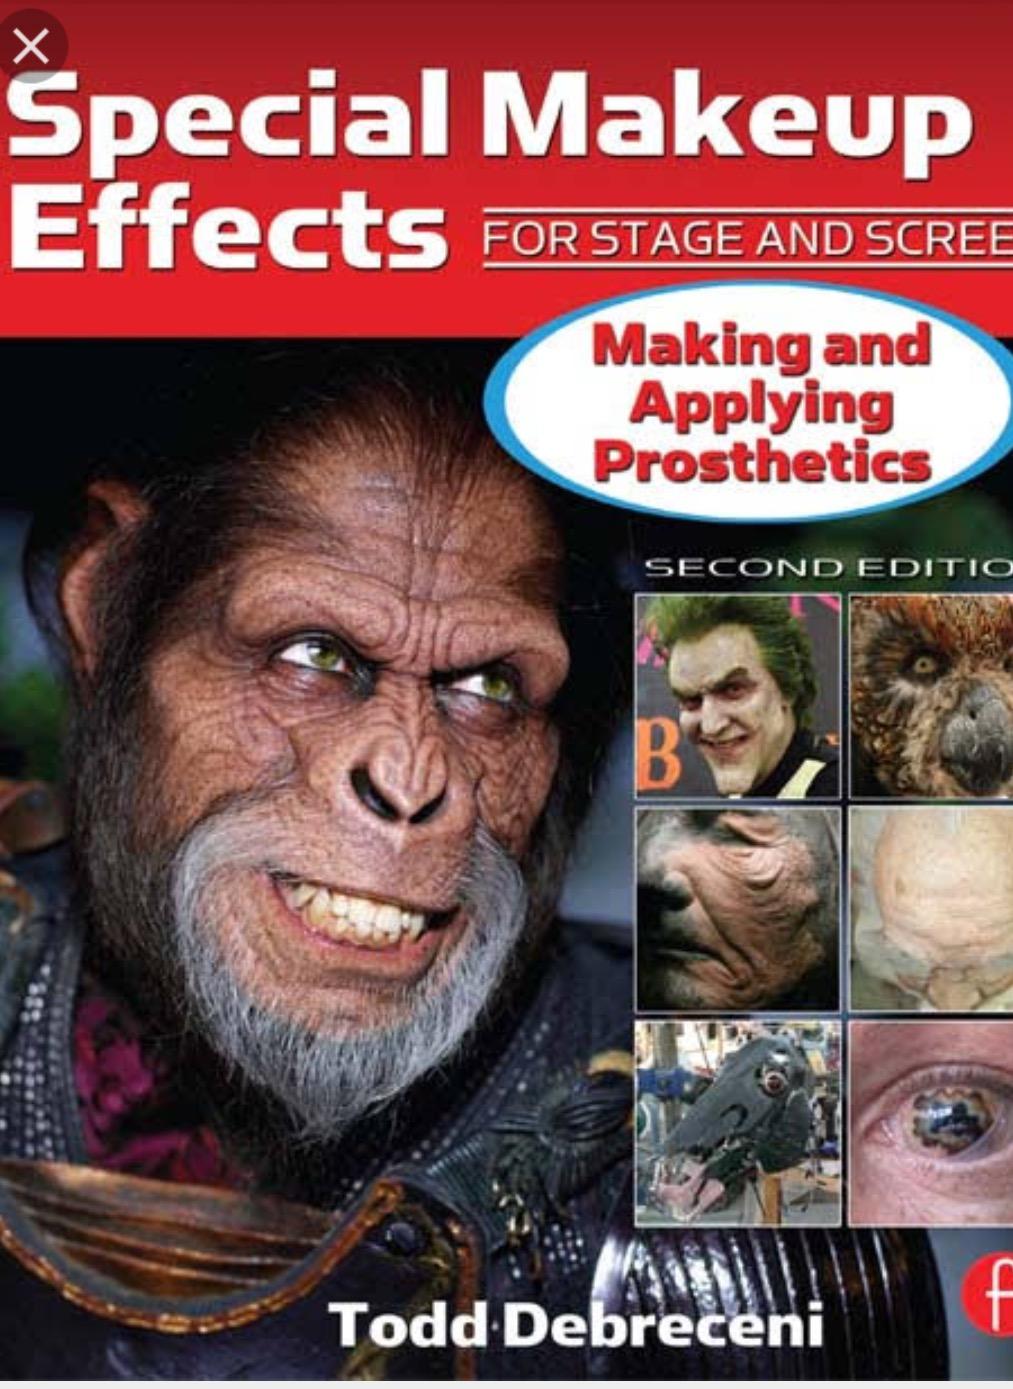 Special makeup effects